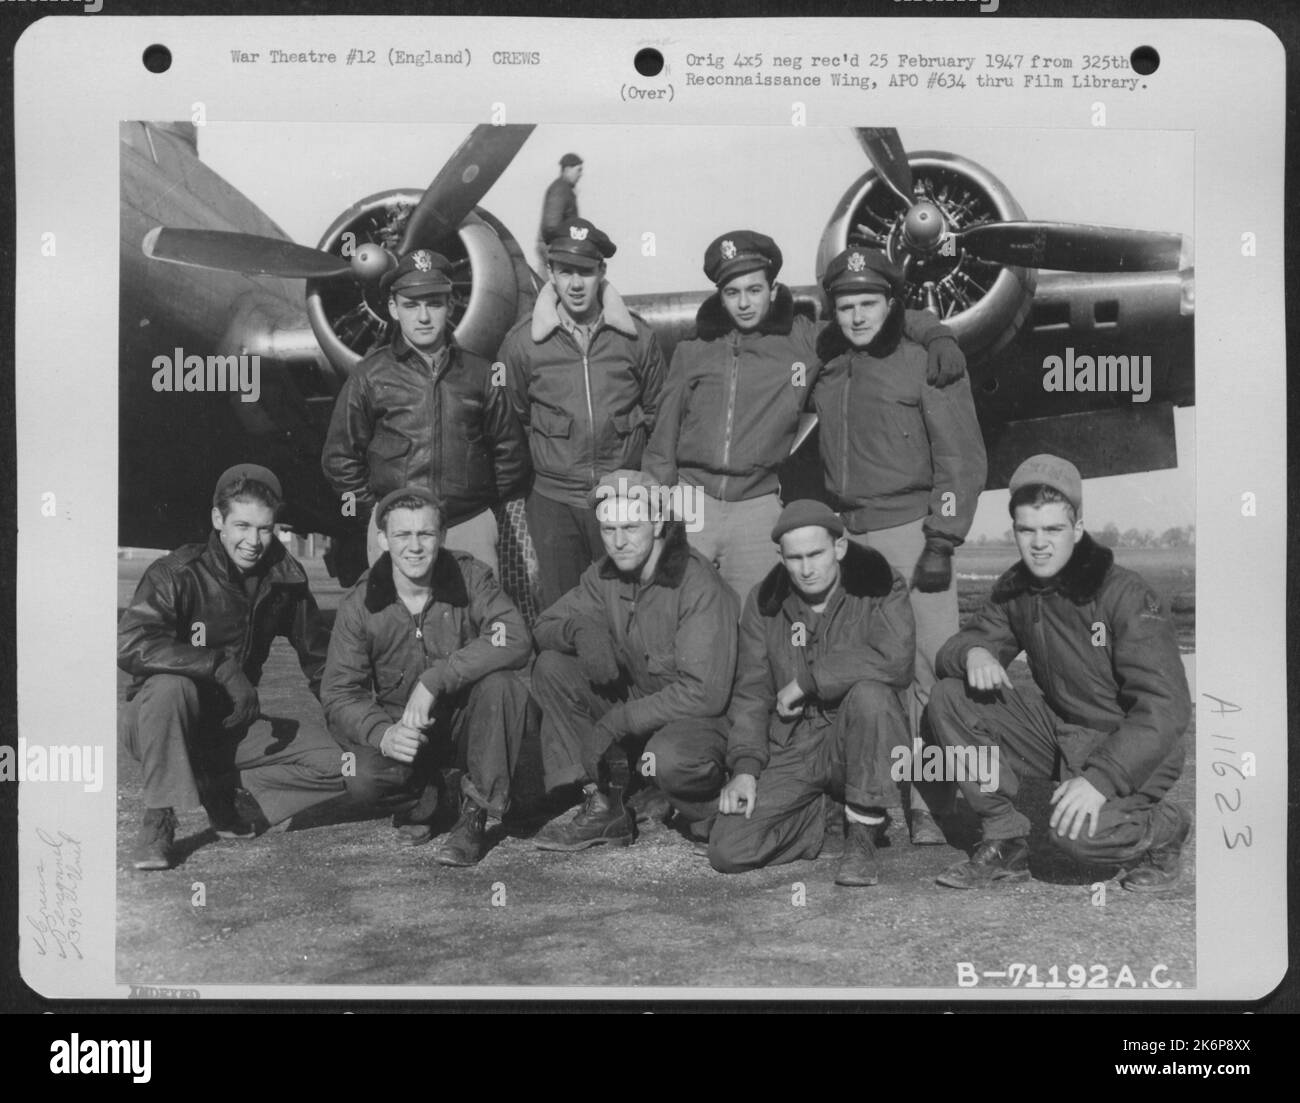 Lt. Kotta And Crew Of The Boeing B-17 'Flying Fortress' Of The 390Th Bomb Group Pose By Their Plane At Their Base In England On 13 February 1945. Stock Photo